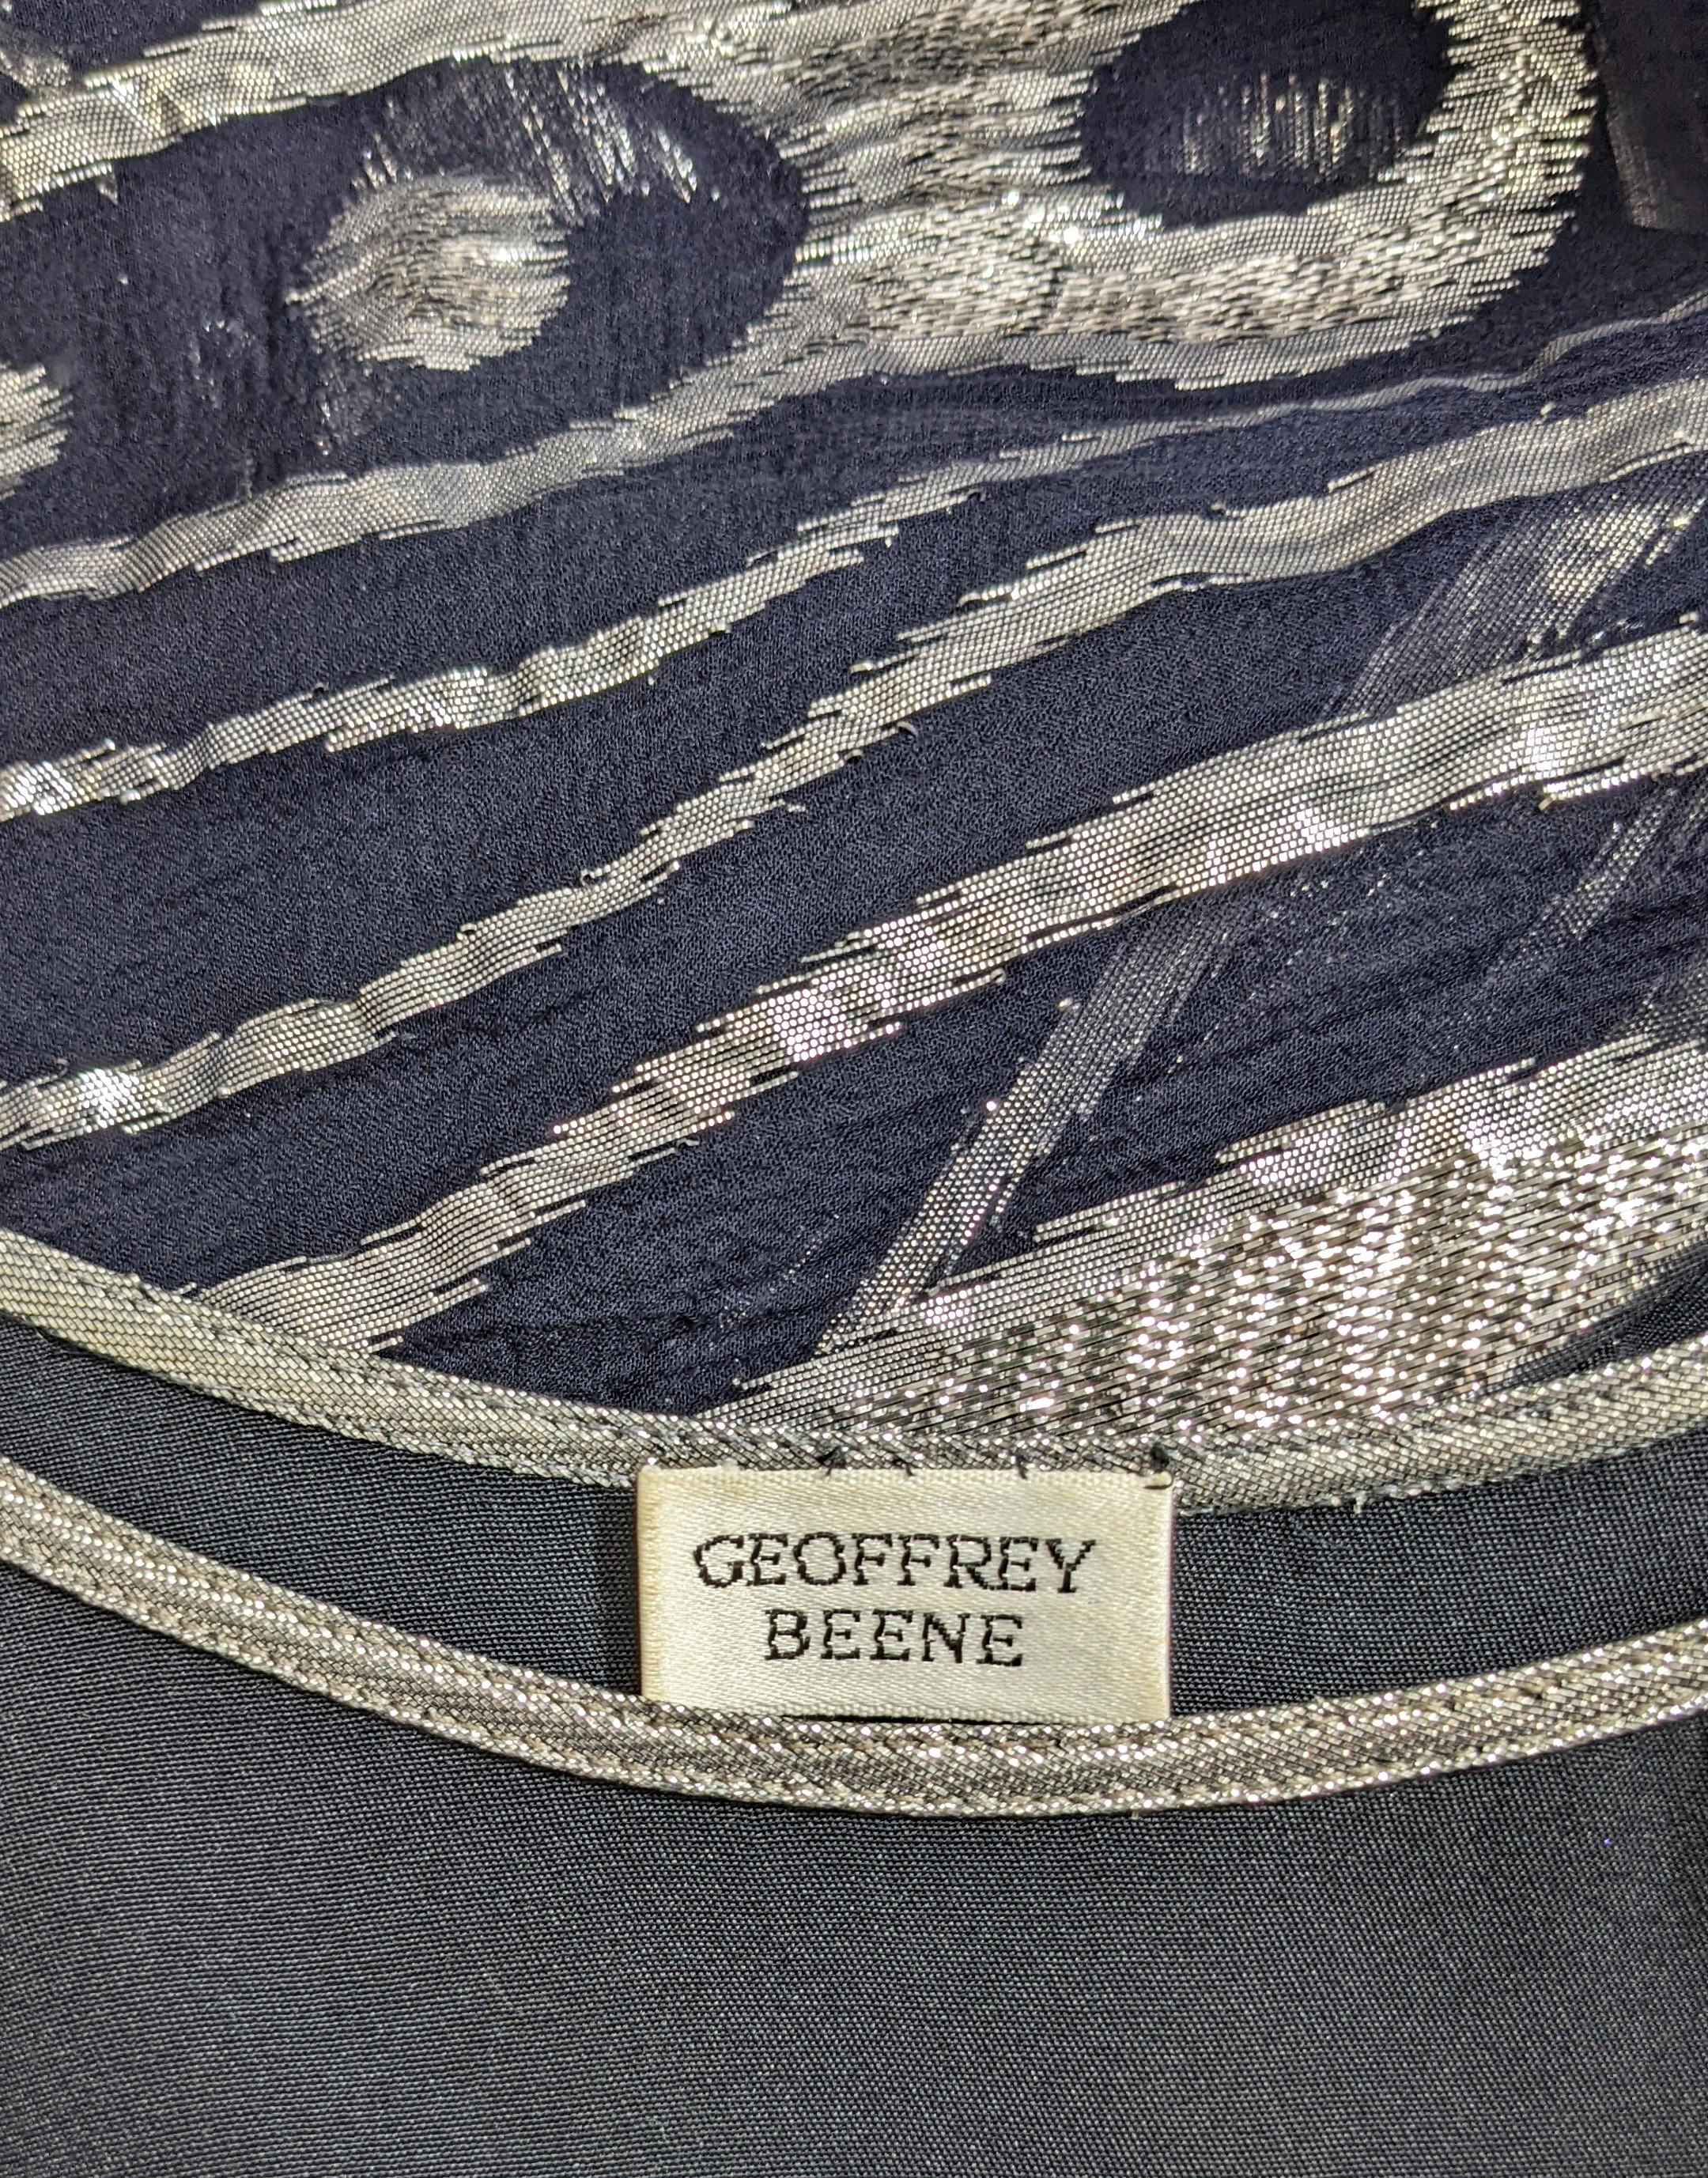 Geoffrey Beene Shift with Sheer Lame Underlay For Sale 4